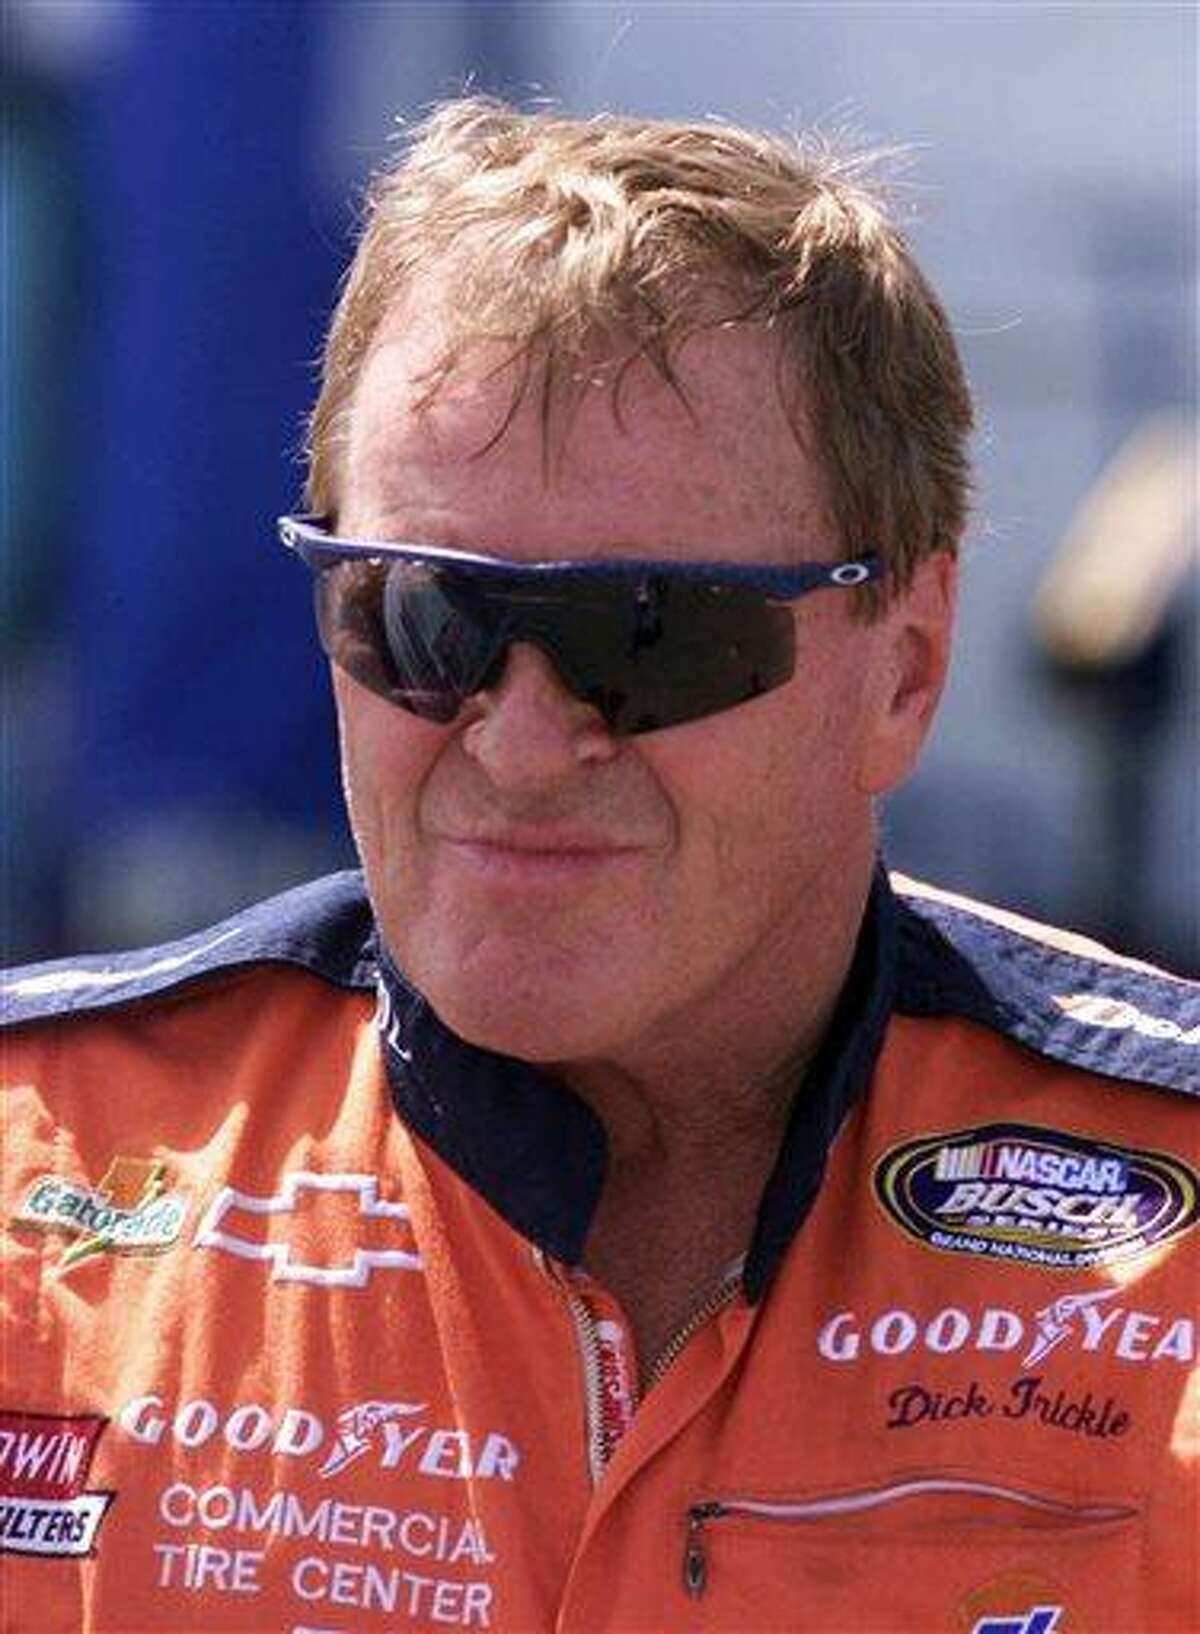 FILE - In this June 4, 1999, file photo, NASCAR driver Dick Trickle speaks to fans after qualifying on the pole position the NASCAR Busch series auto race at Dover Downs in Dover, Del. Authorities in North Carolina said Thursday, May 16, 2013, that Trickle has died of an apparent self-inflicted gunshot wound. He was 71. (AP Photo/The News Journal, Brian Branch-Price, File) NO SALES